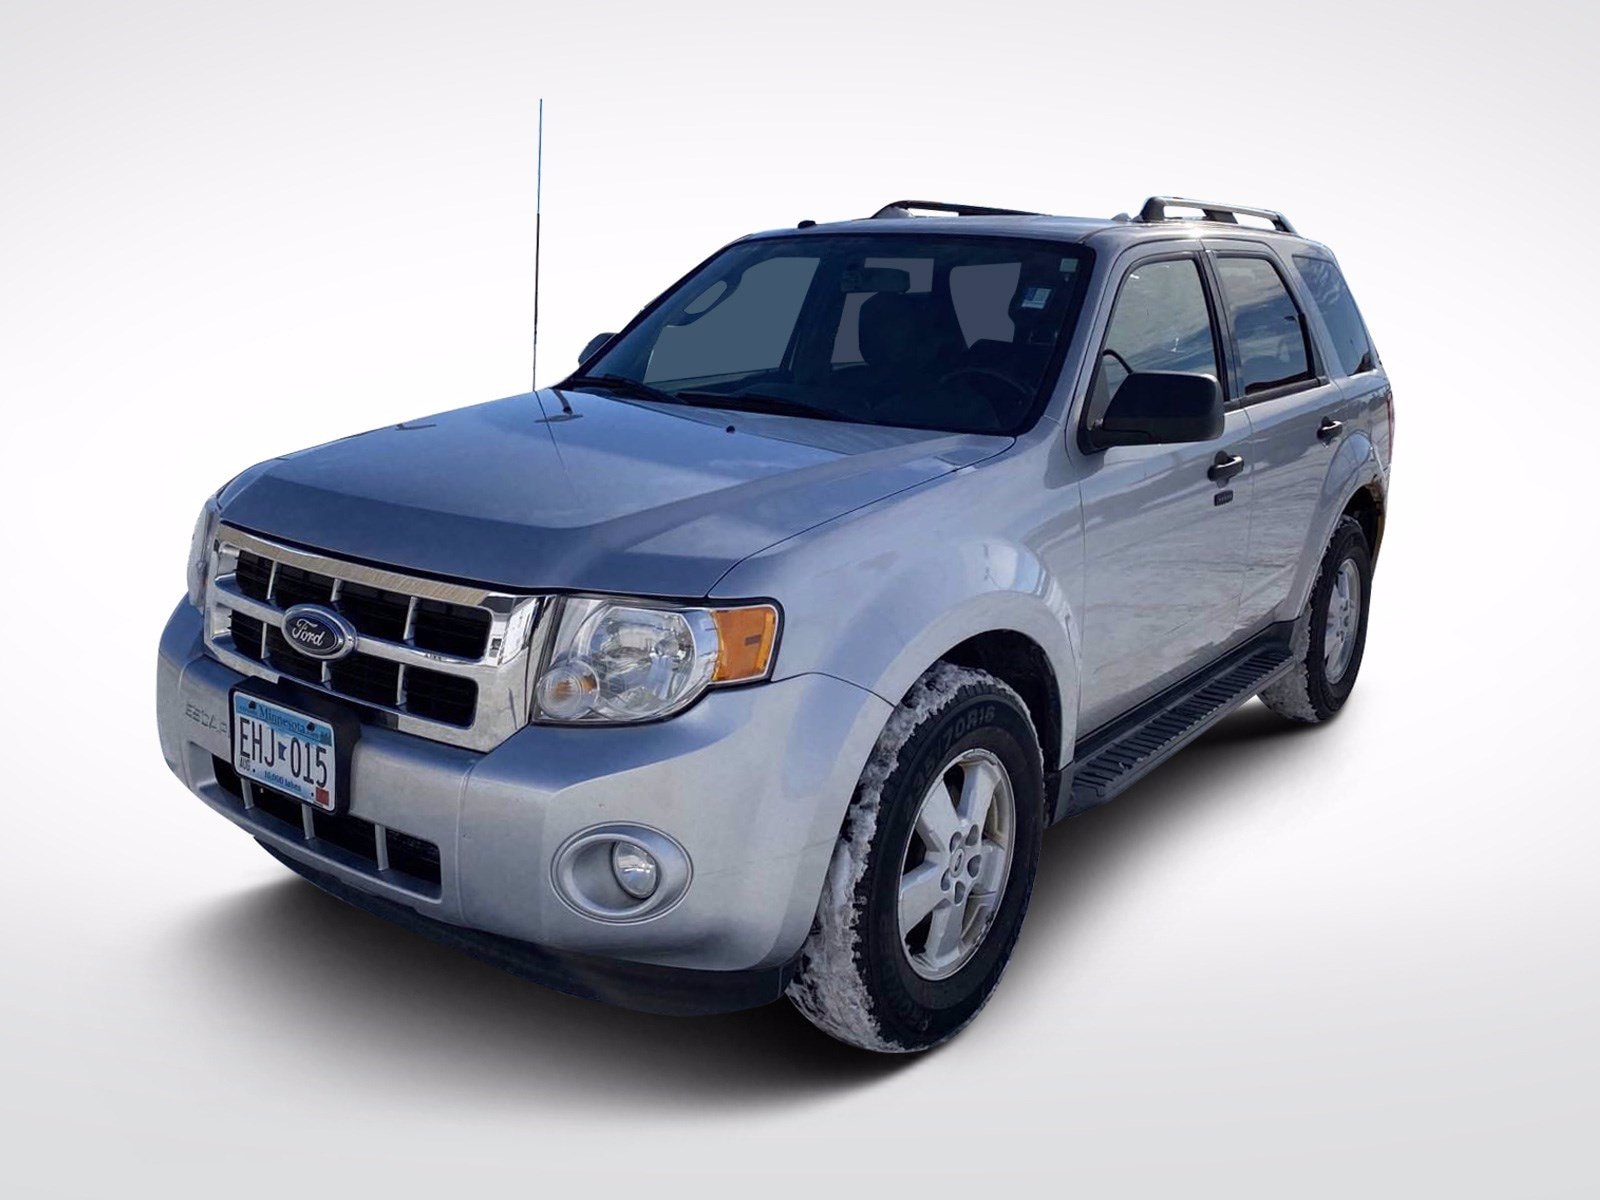 Used 2010 Ford Escape XLT with VIN 1FMCU0DG0AKA31601 for sale in Baxter, Minnesota